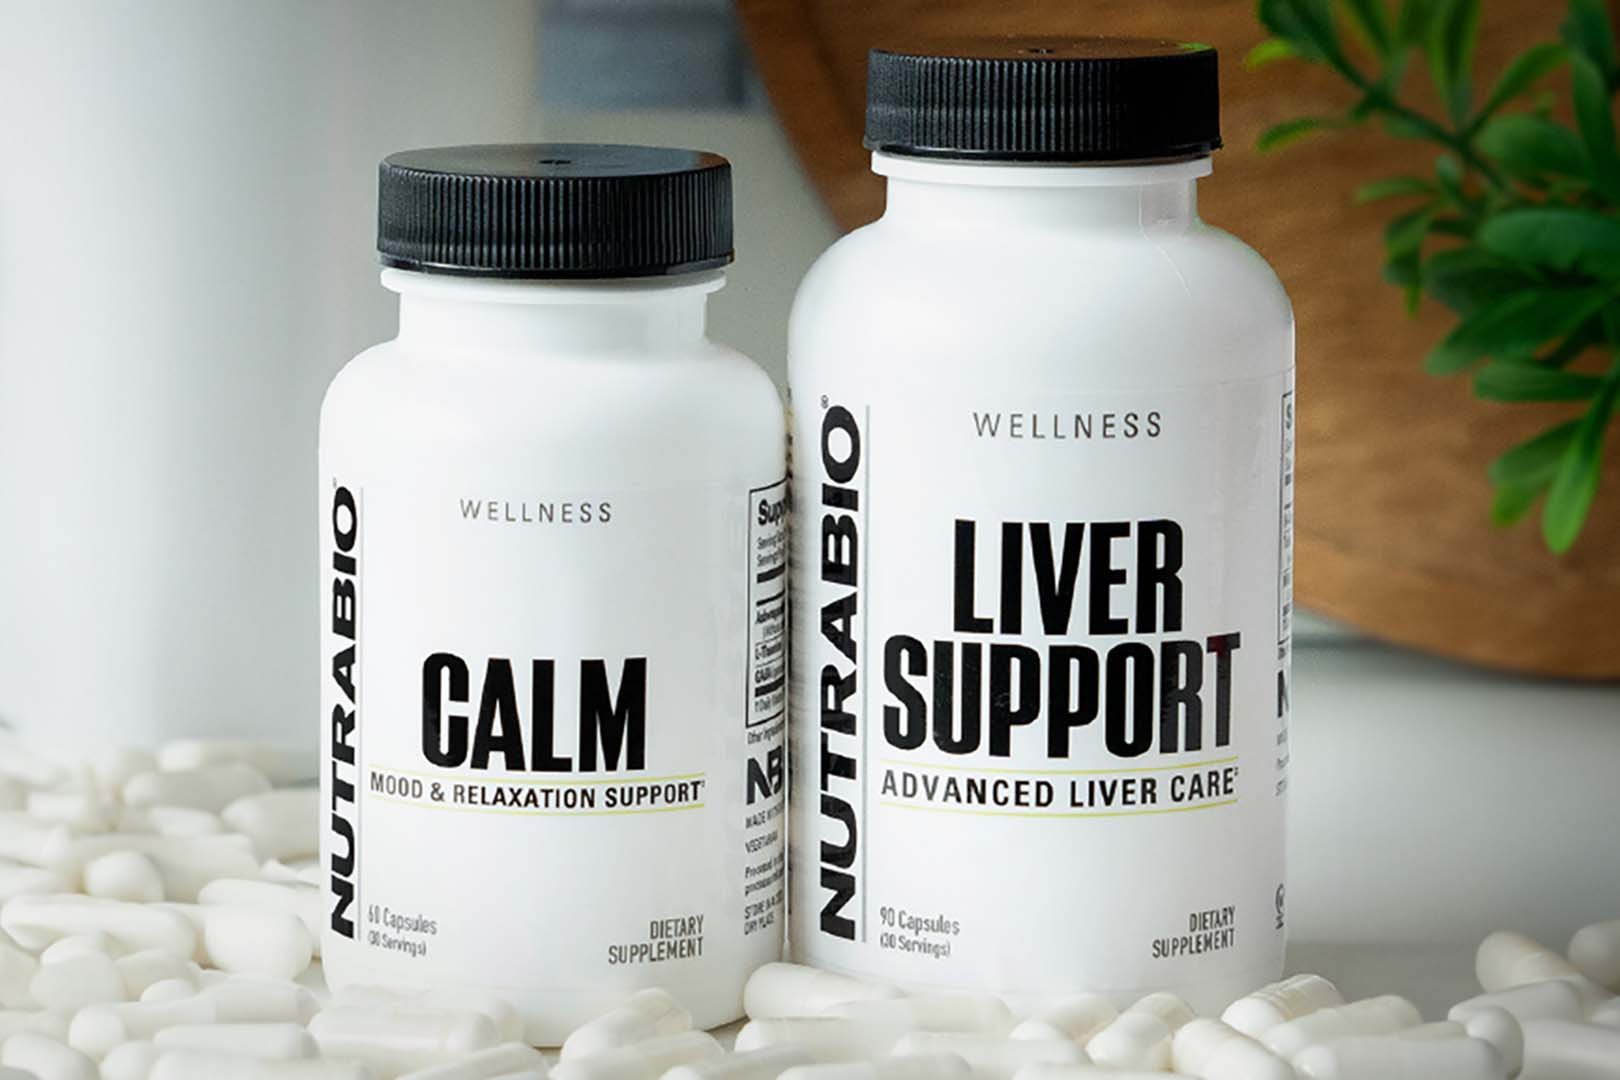 Details On Nutrabio Calm And Liver Support